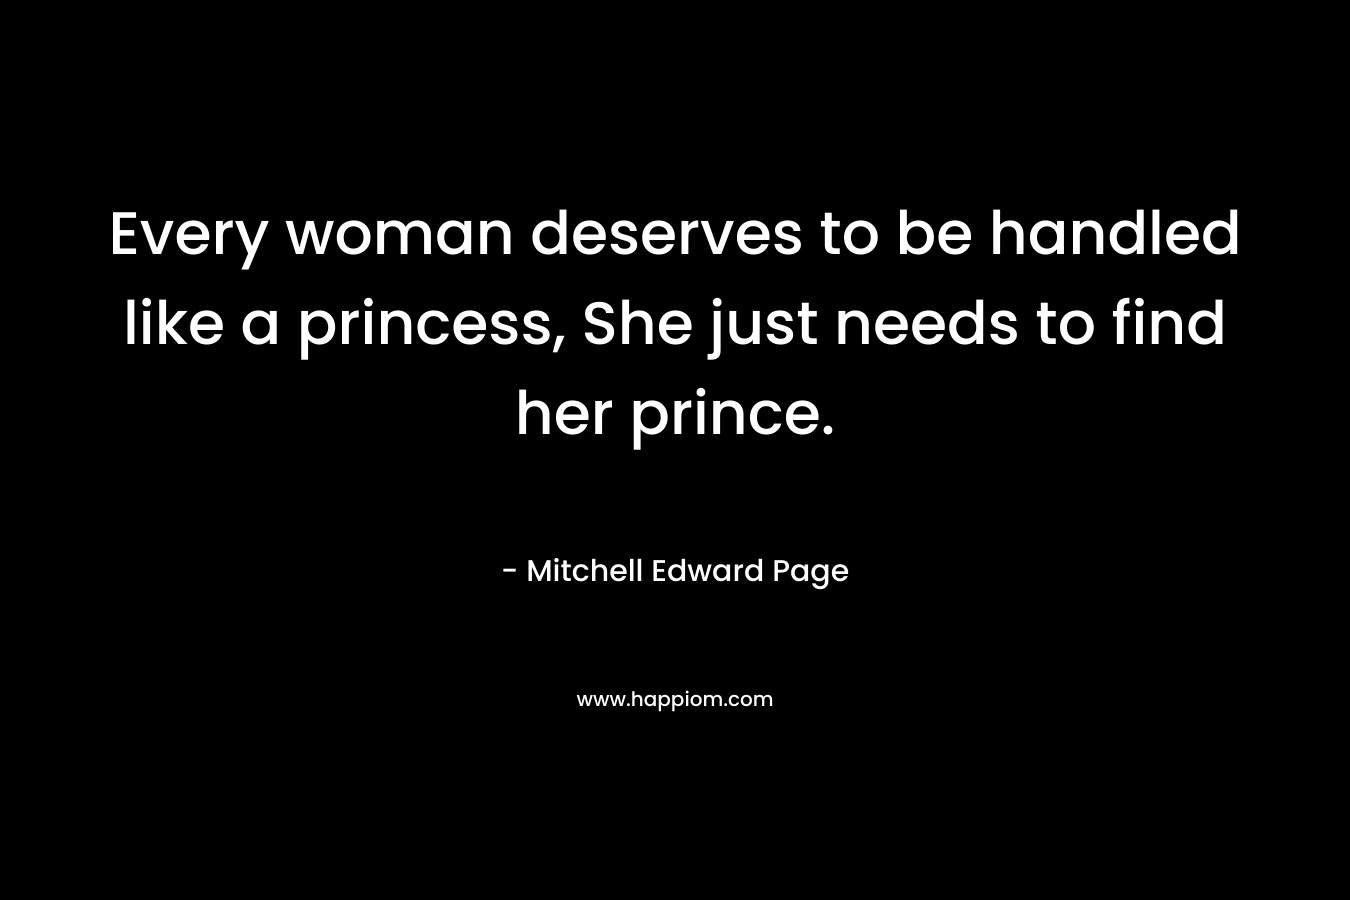 Every woman deserves to be handled like a princess, She just needs to find her prince. – Mitchell Edward Page